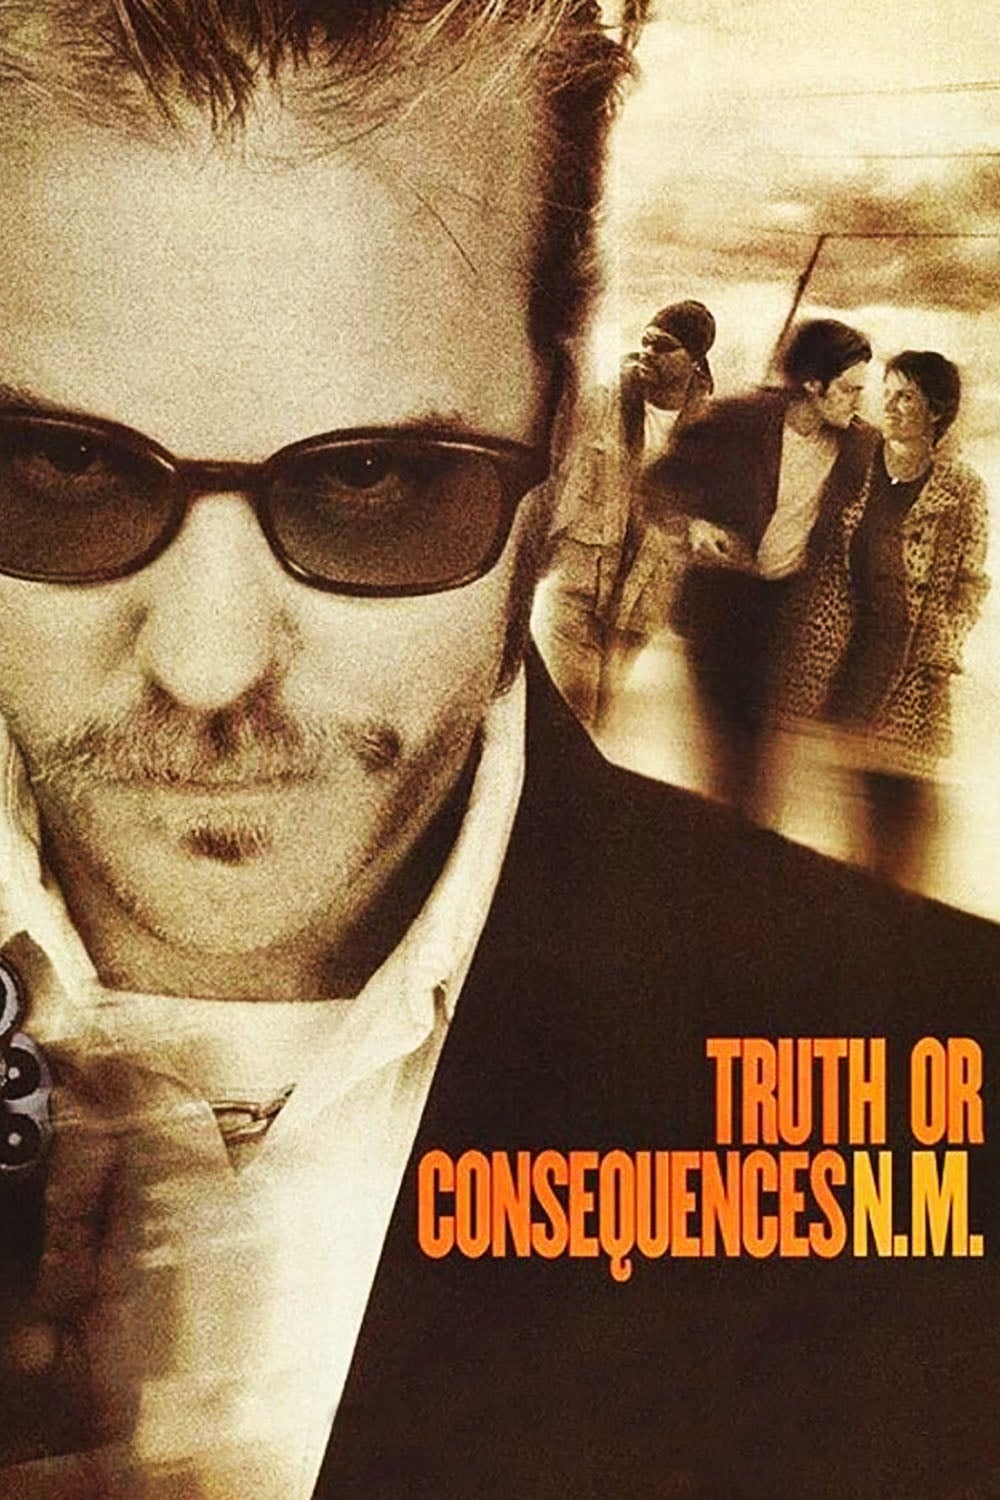 TRUTH OR CONSEQUENCES, N.M